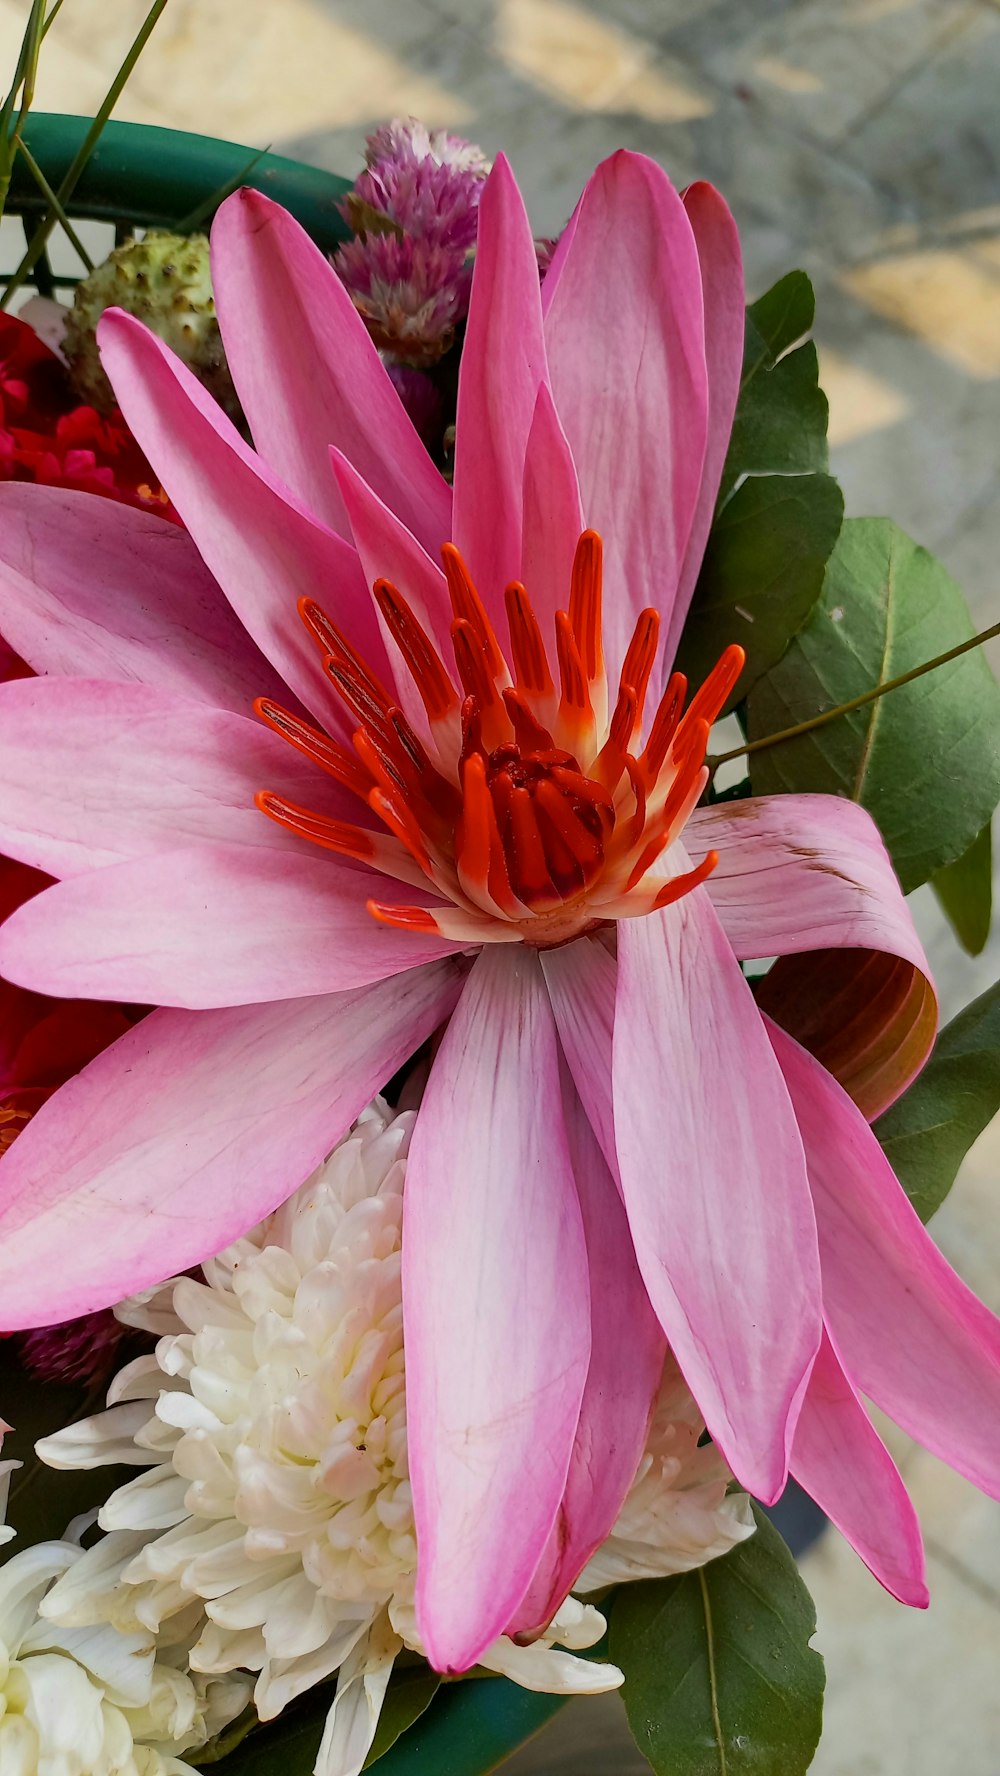 a pink and white flower in a green basket